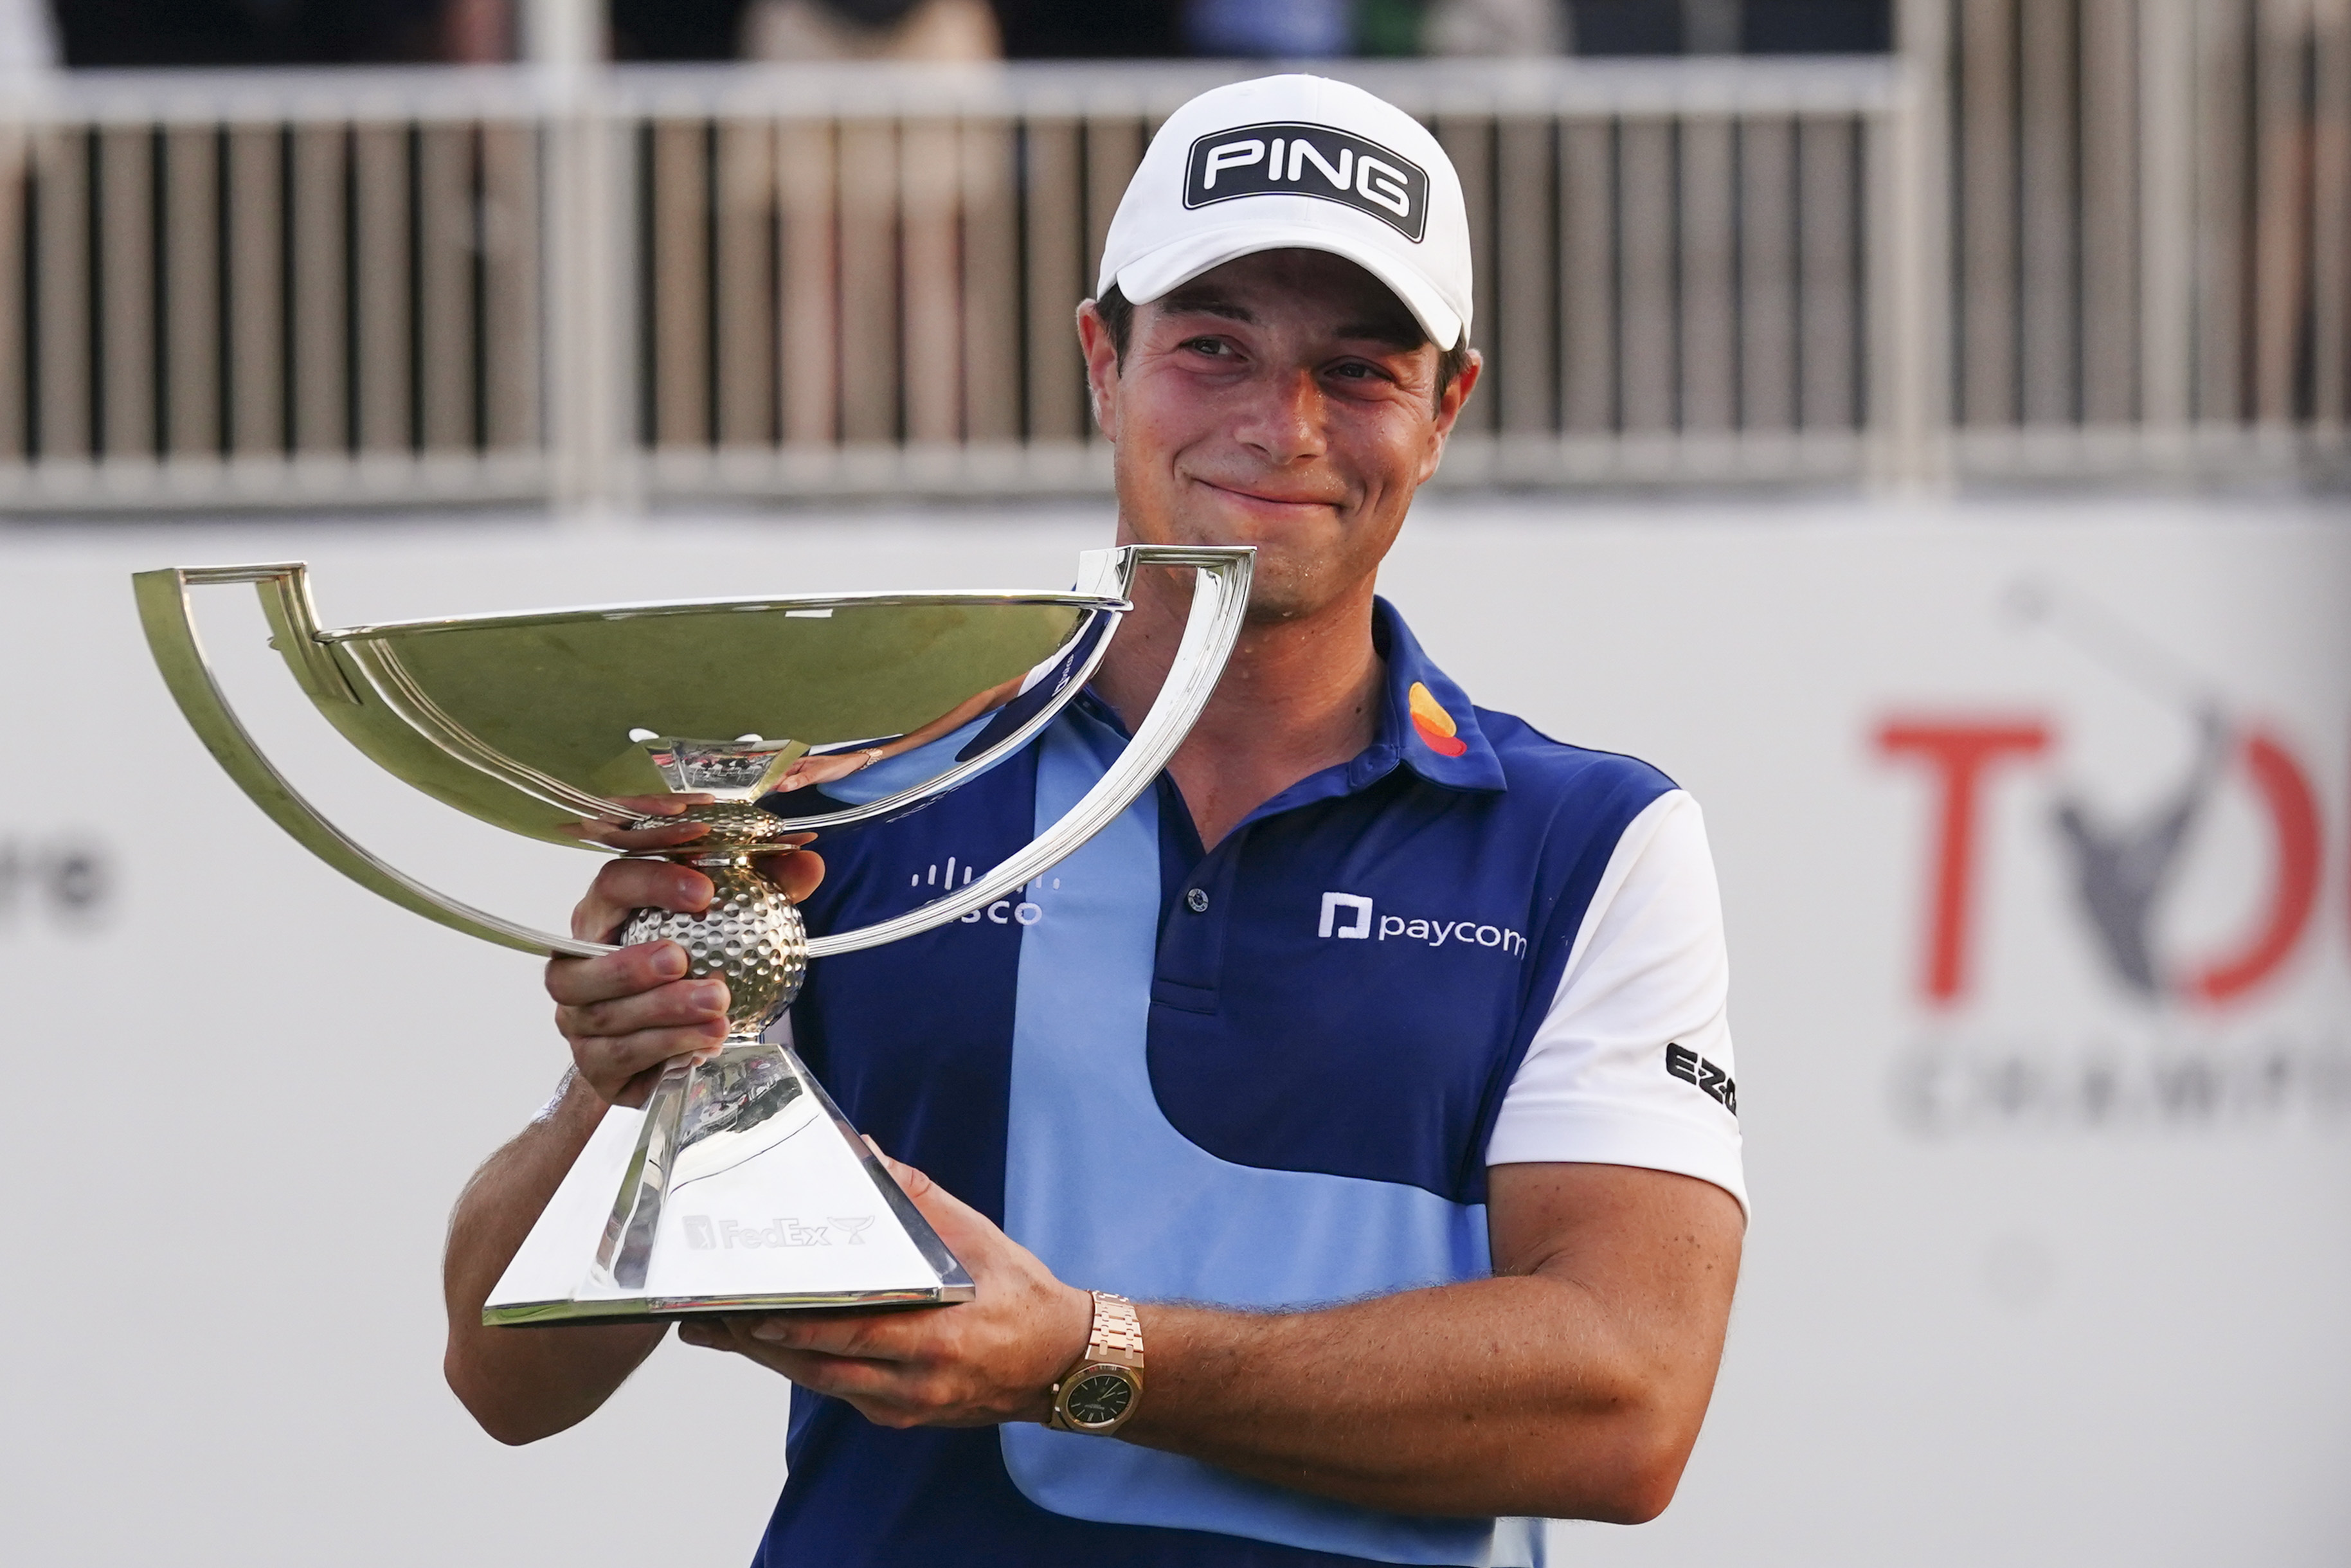 Viktor Hovland finishes off the best two weeks of his golf career by capturing the FedEx Cup title